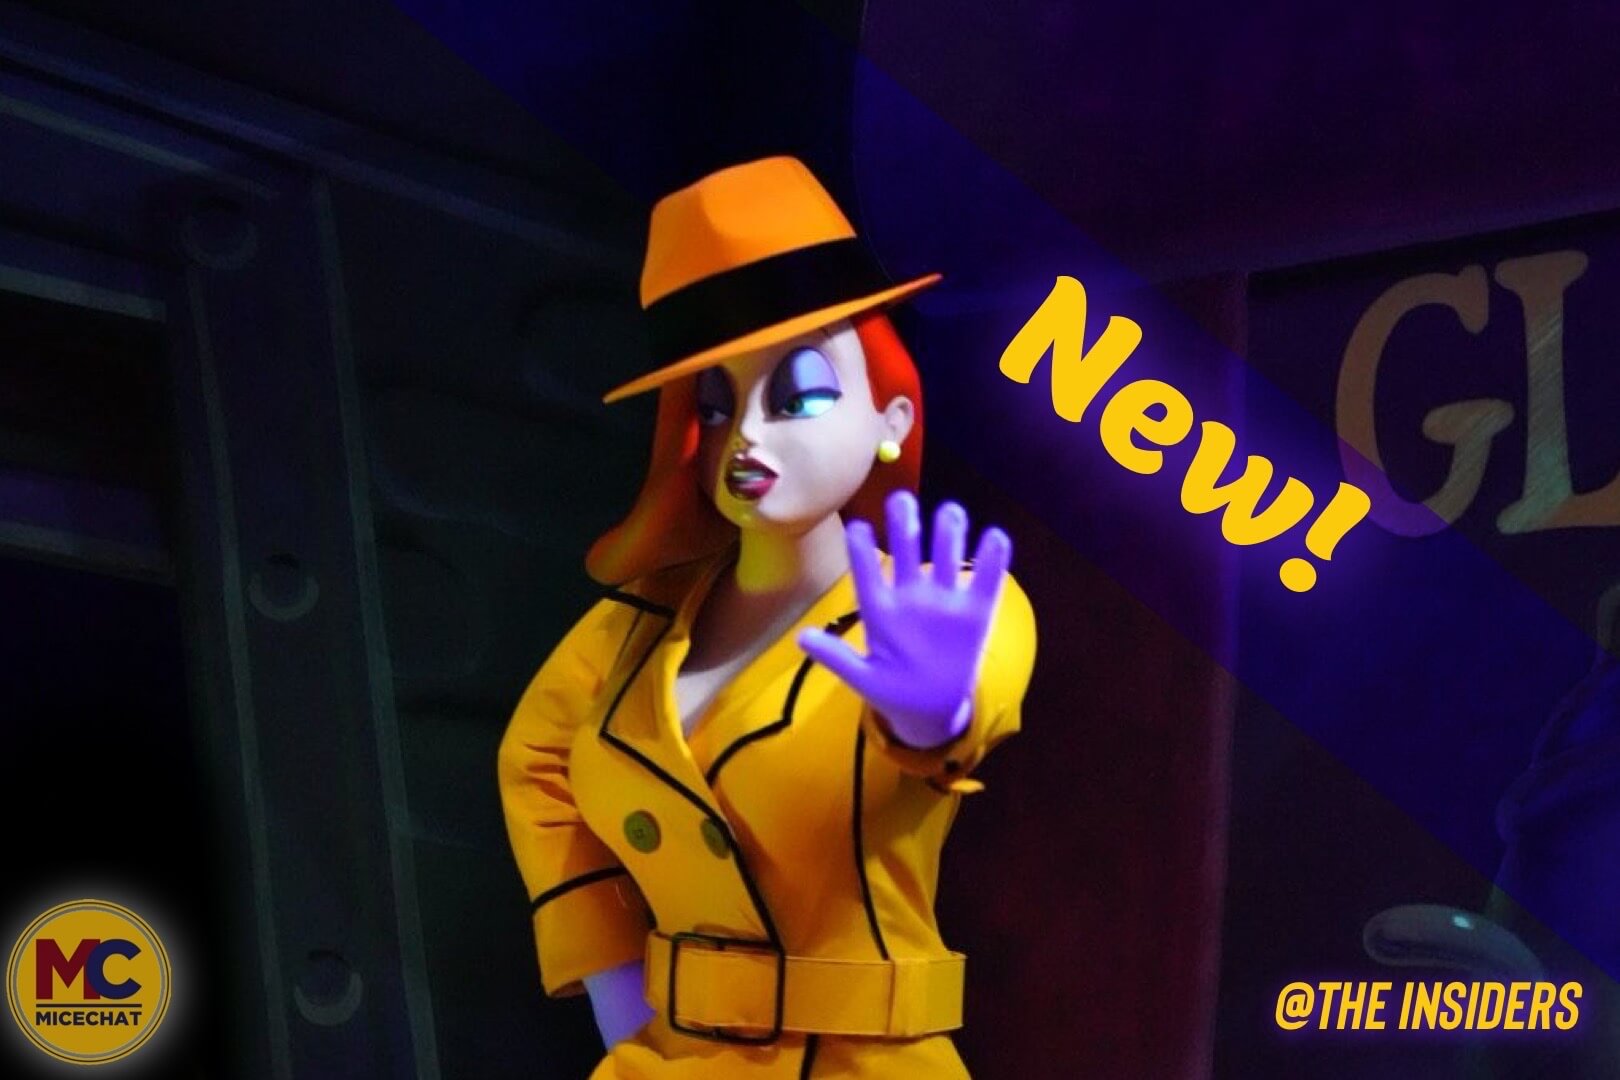 1620px x 1080px - Roger Rabbit Cover Up at Disneyland - Jessica's New Starring Role